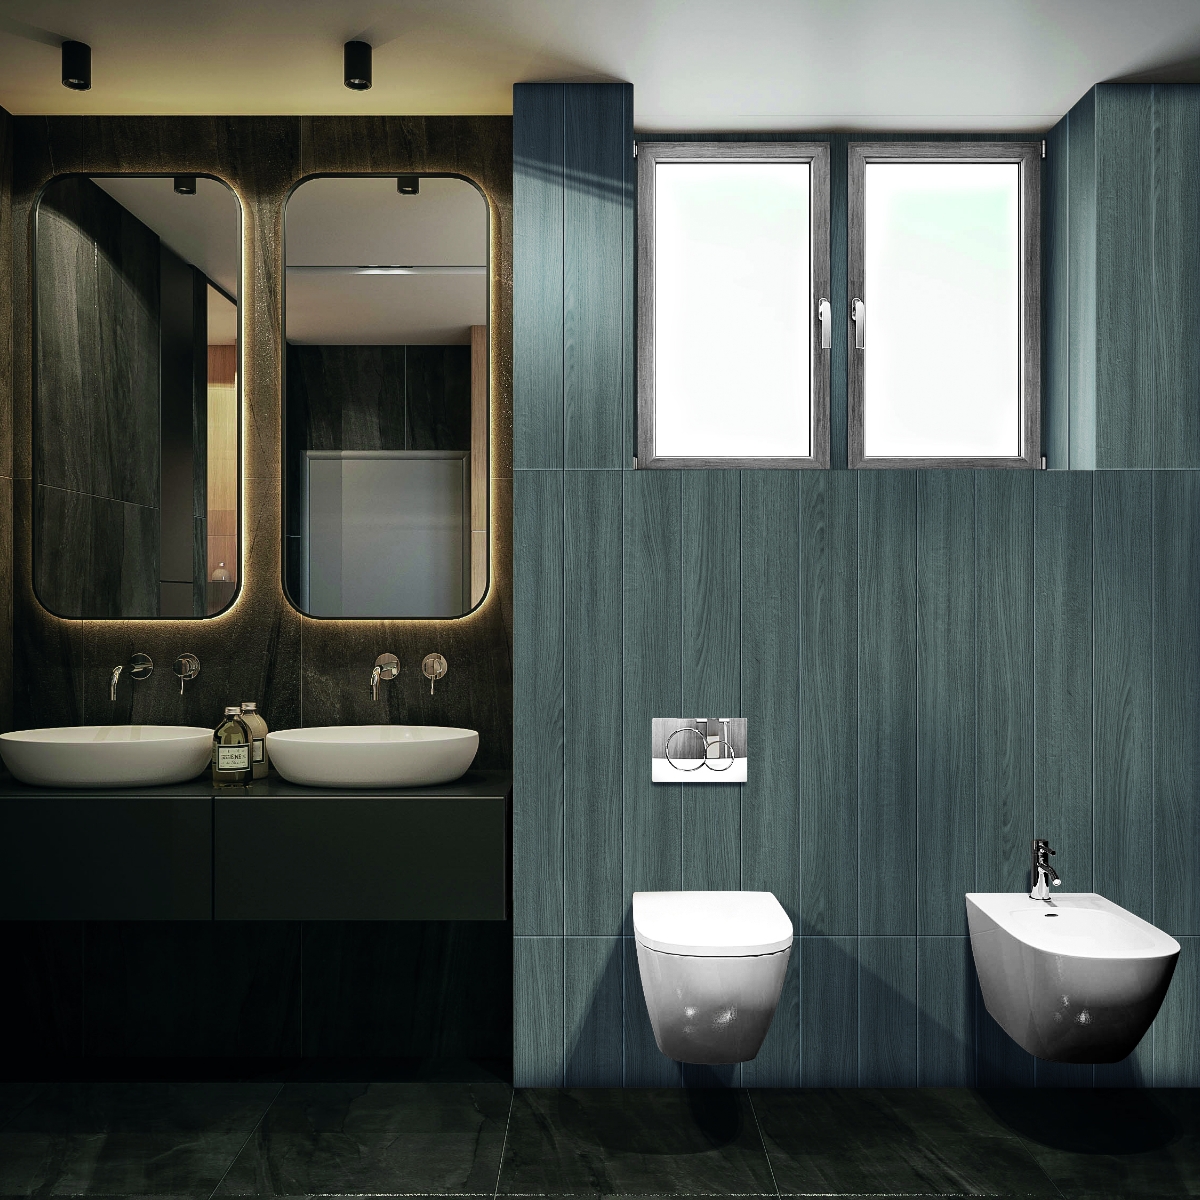 A dark green bathroom with wall-hung toilets and vanity sink